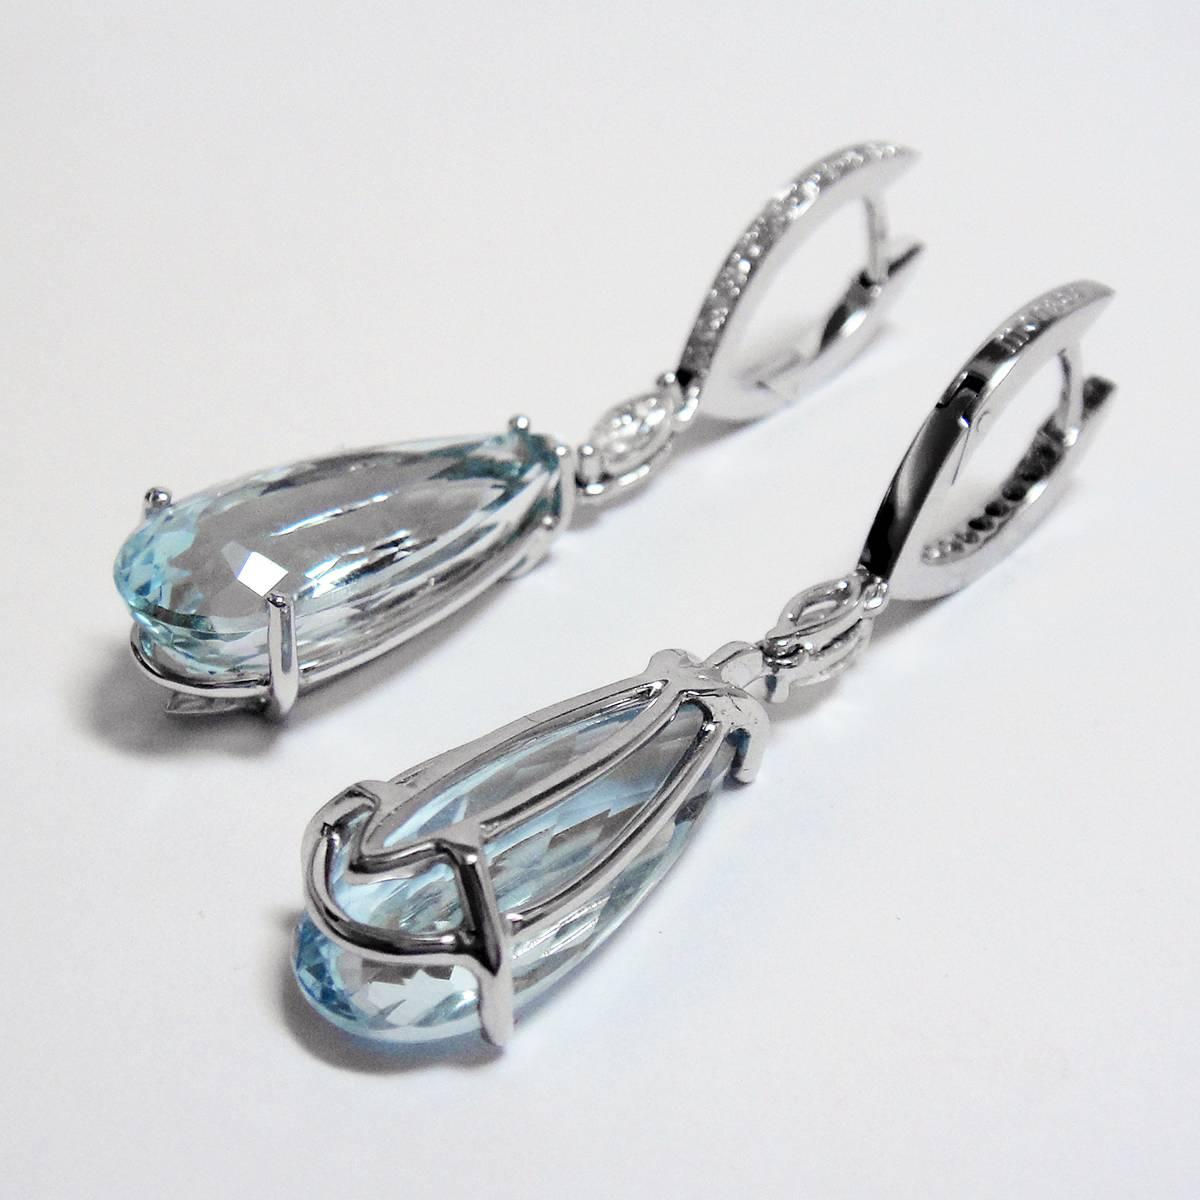 Crafted in 19.2K white gold and set with a pair of aquamarine and diamonds. 
The pair of drop shape aquamarines amounts to 19.72 carats. This piece has been designed by Monseo and manufactured by Monseo artisans in Porto, Portugal.

Materials
19.2K